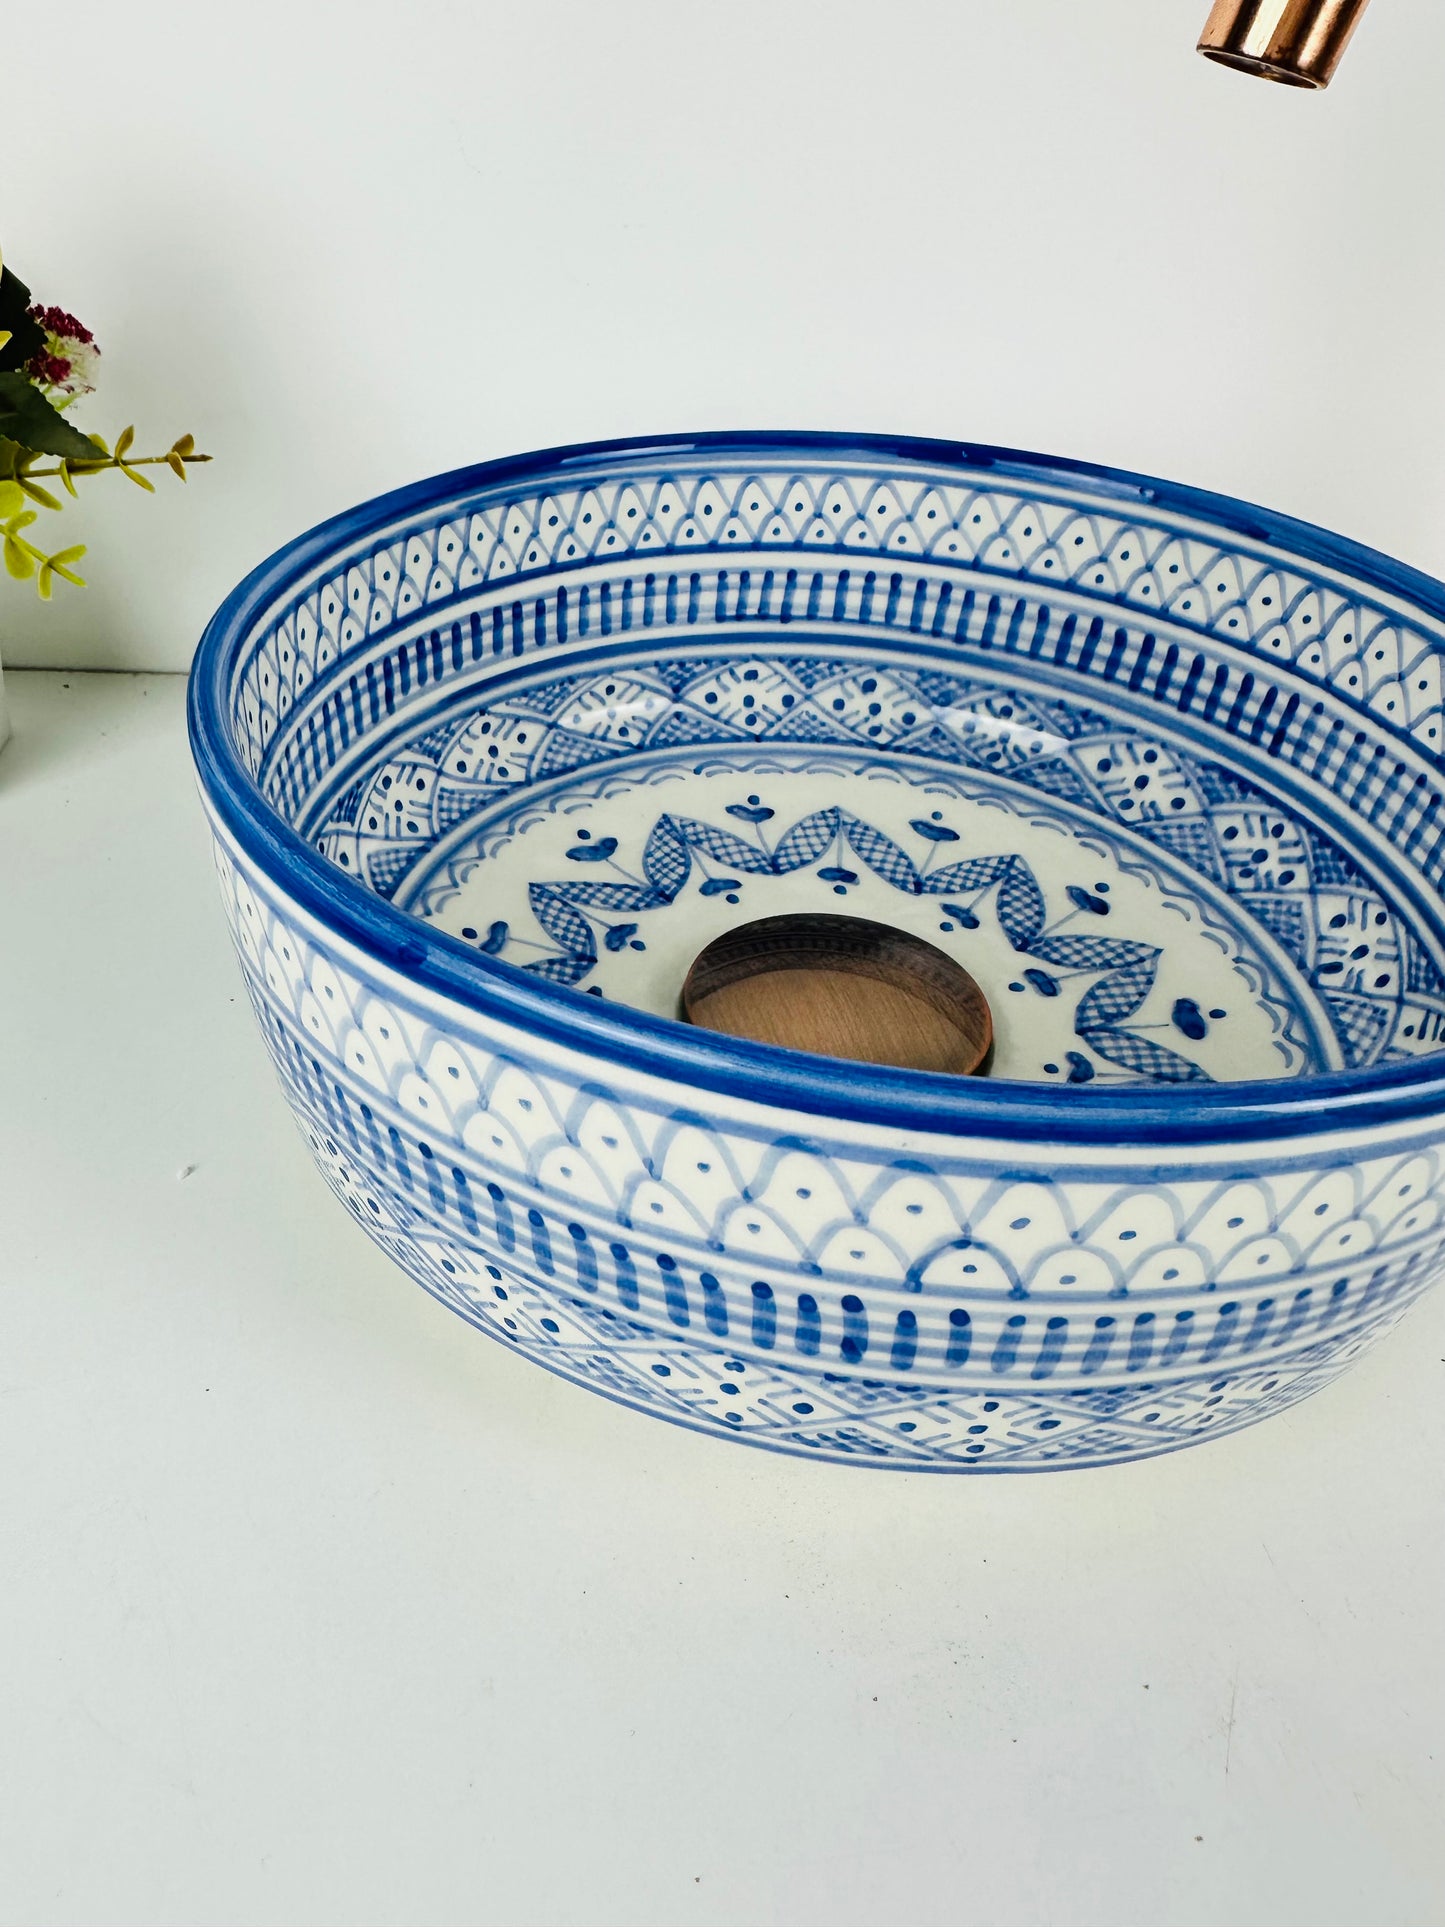 Classic Azure: Handcrafted Ceramic Sink with Traditional Blue Design